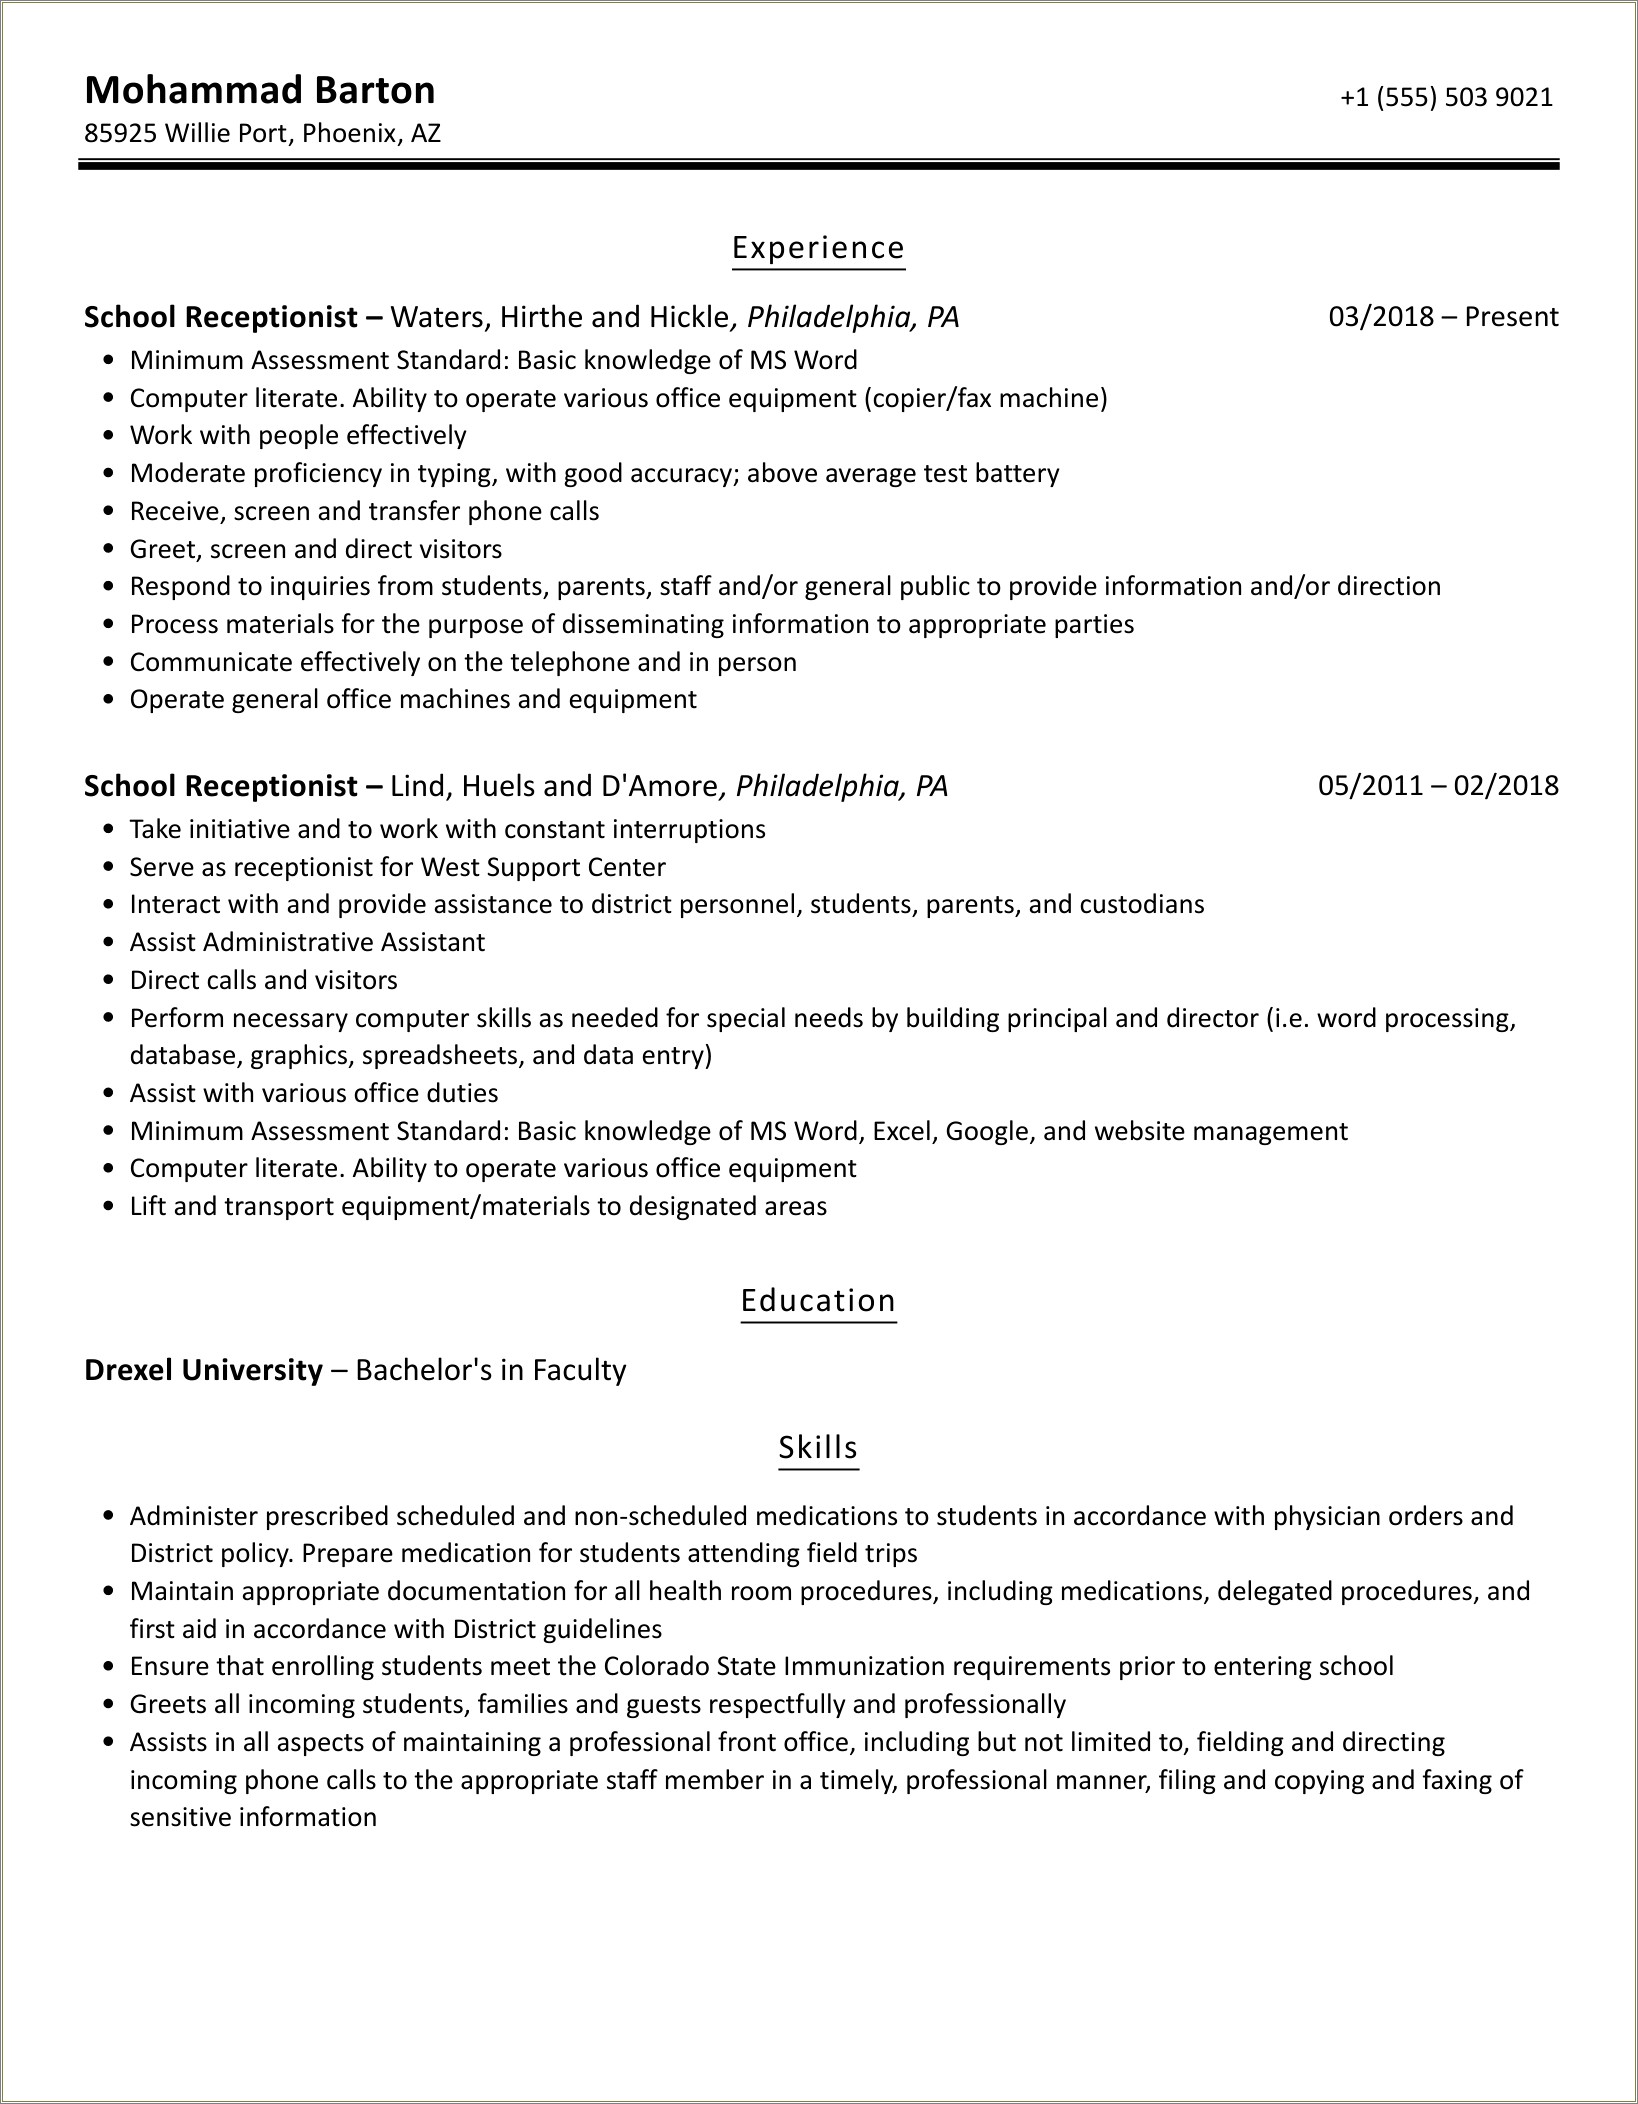 Resume For School Receptionist With No Experience